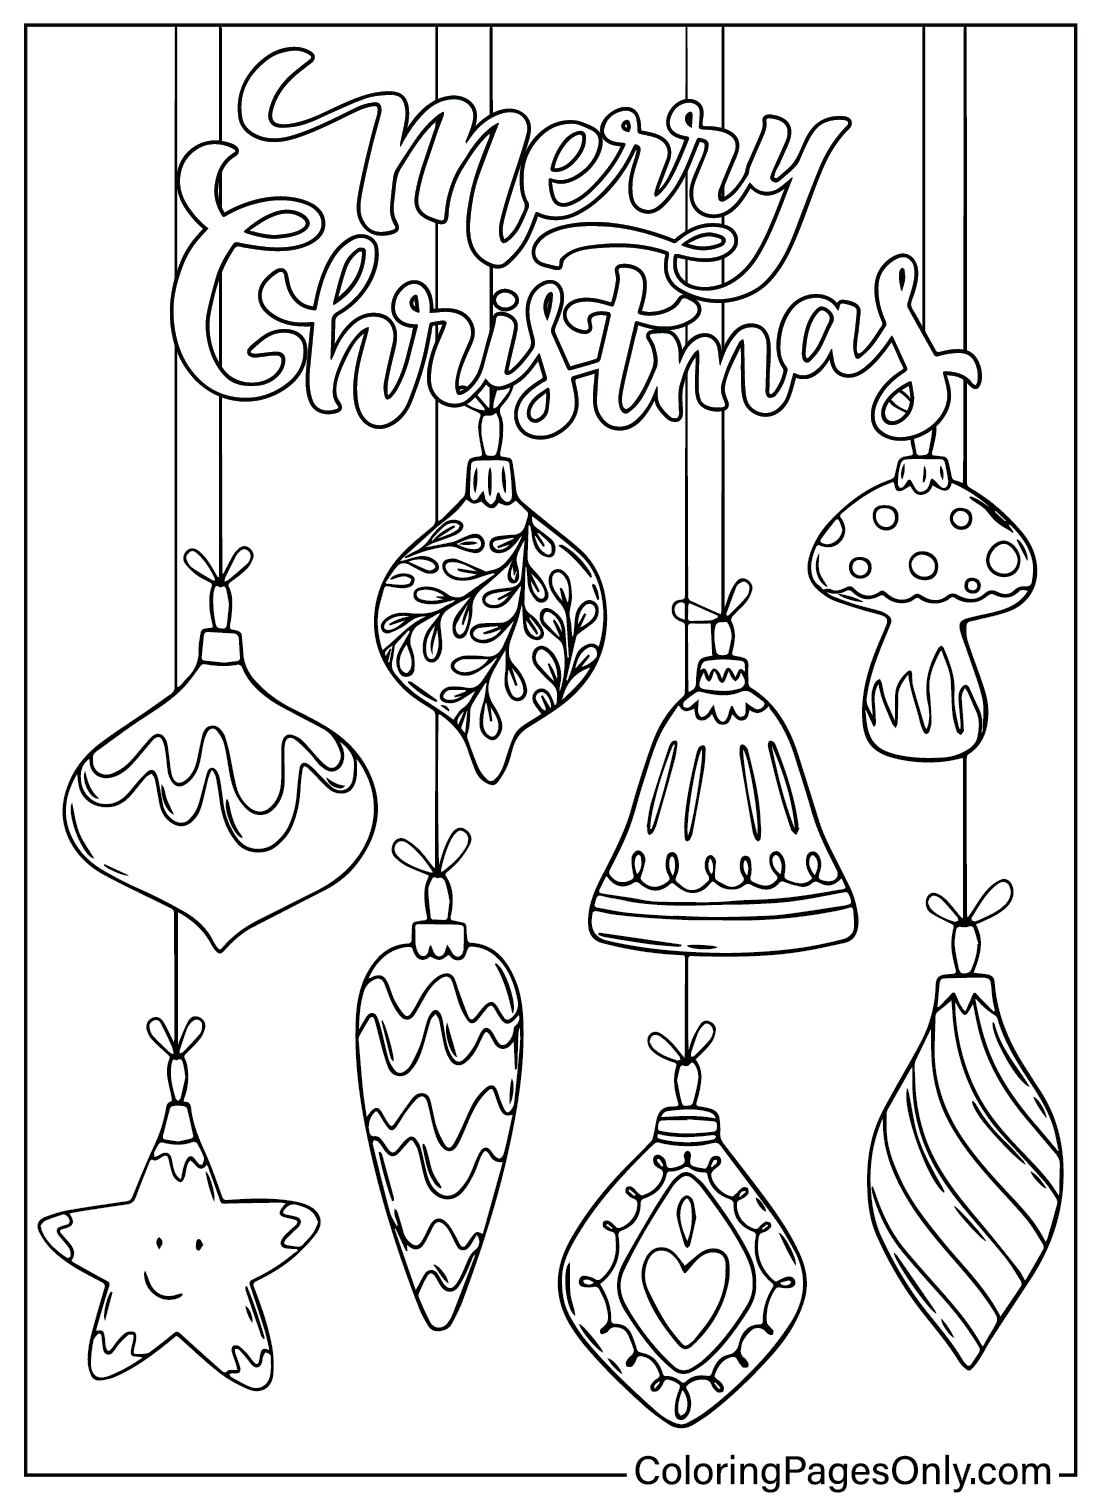 Christmas Ornaments Coloring Pages to Download from Christmas Ornaments